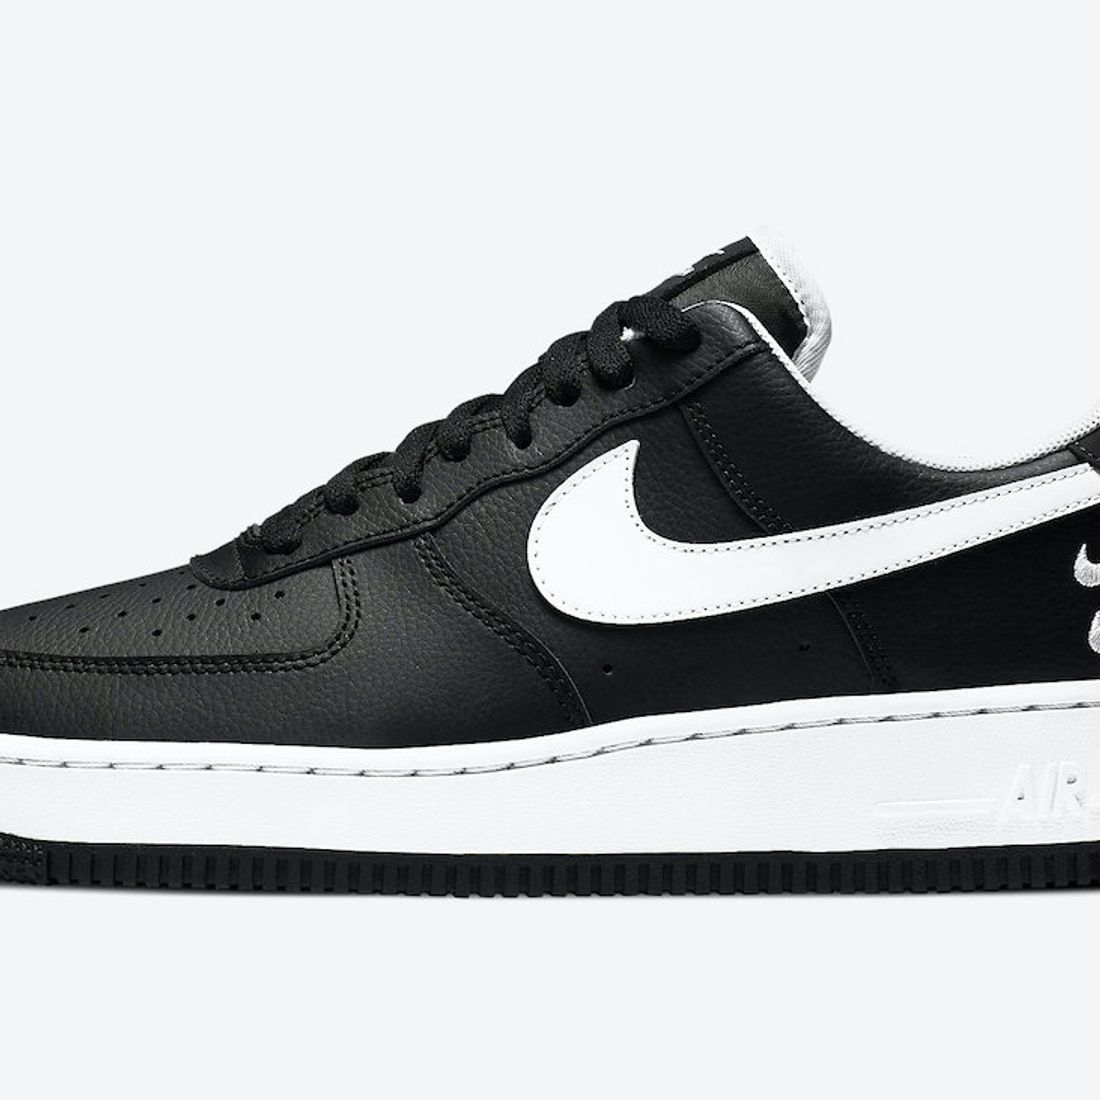 The Nike Air Force 1 Gets Double Swoosh -